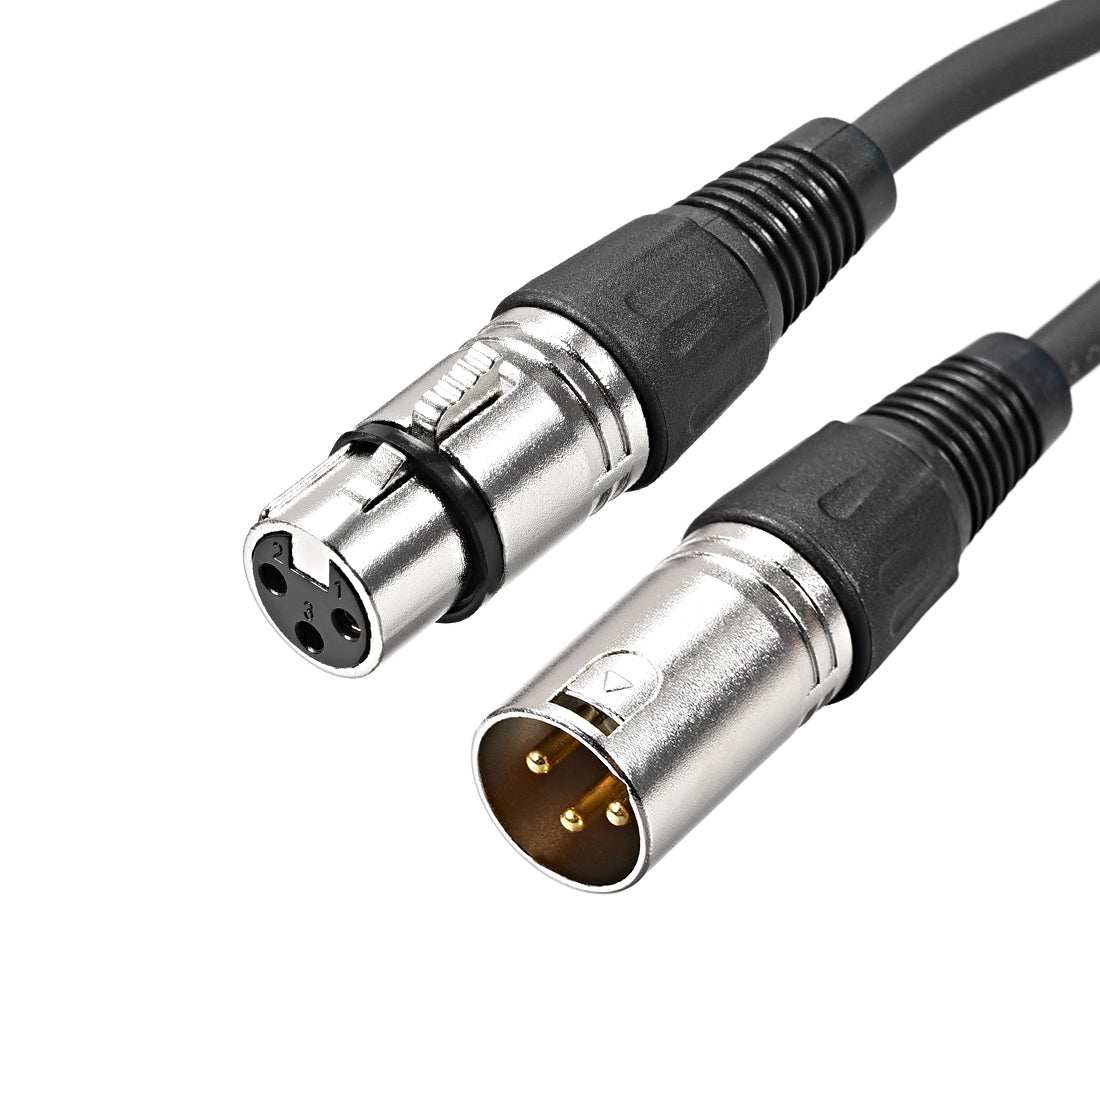 uxcell Uxcell XLR Male to XLR Female Cable Line for Microphone Video Camera Sound Card Mixer Silver Tone XLR Black Line 2M  6.56ft